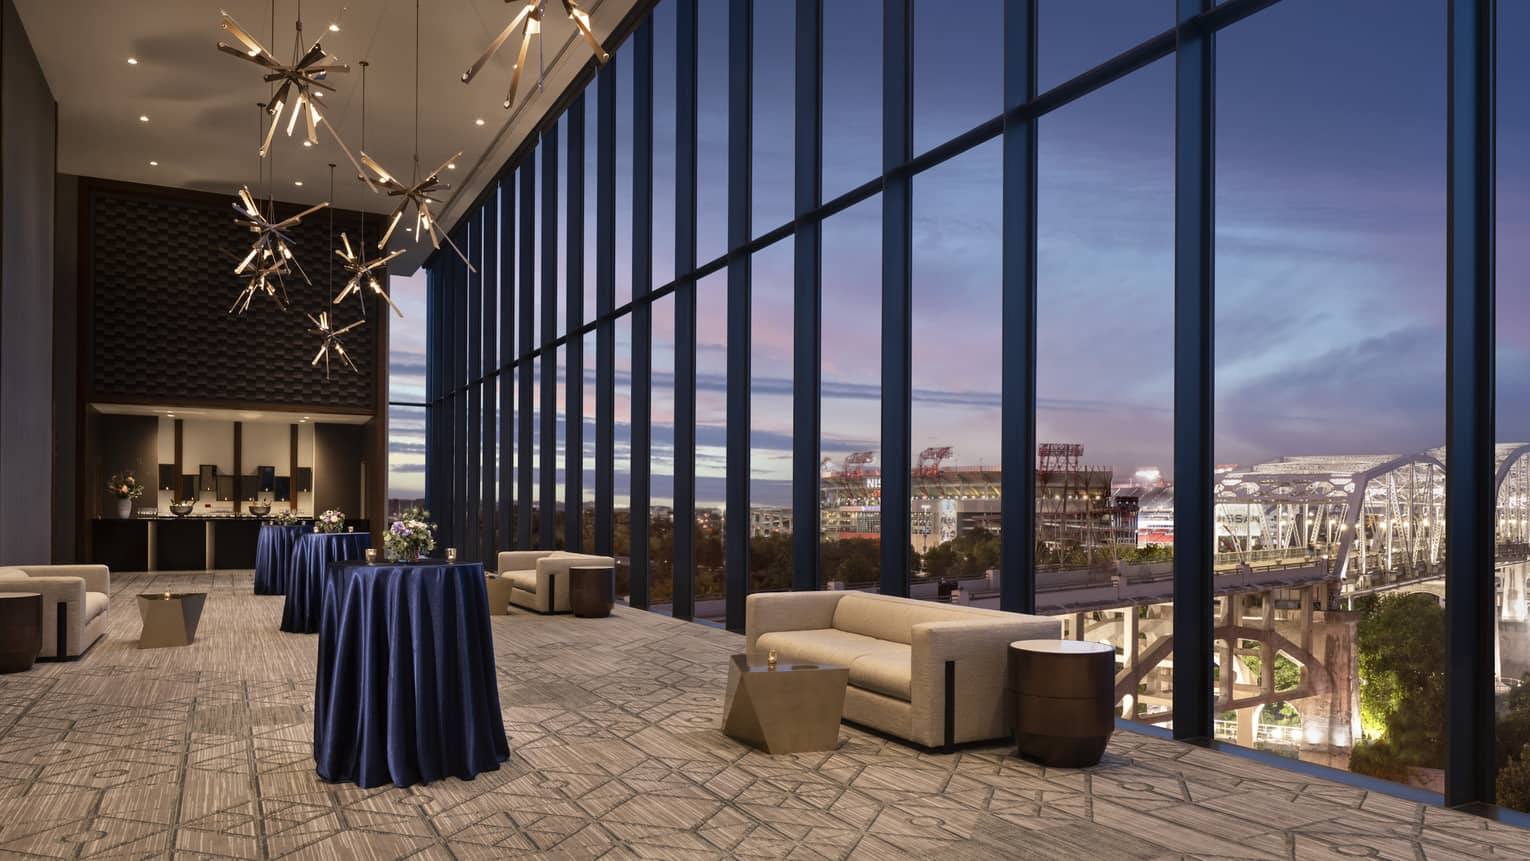 Indoor pre-function space with a wall of windows looking out to Nashville at dusk